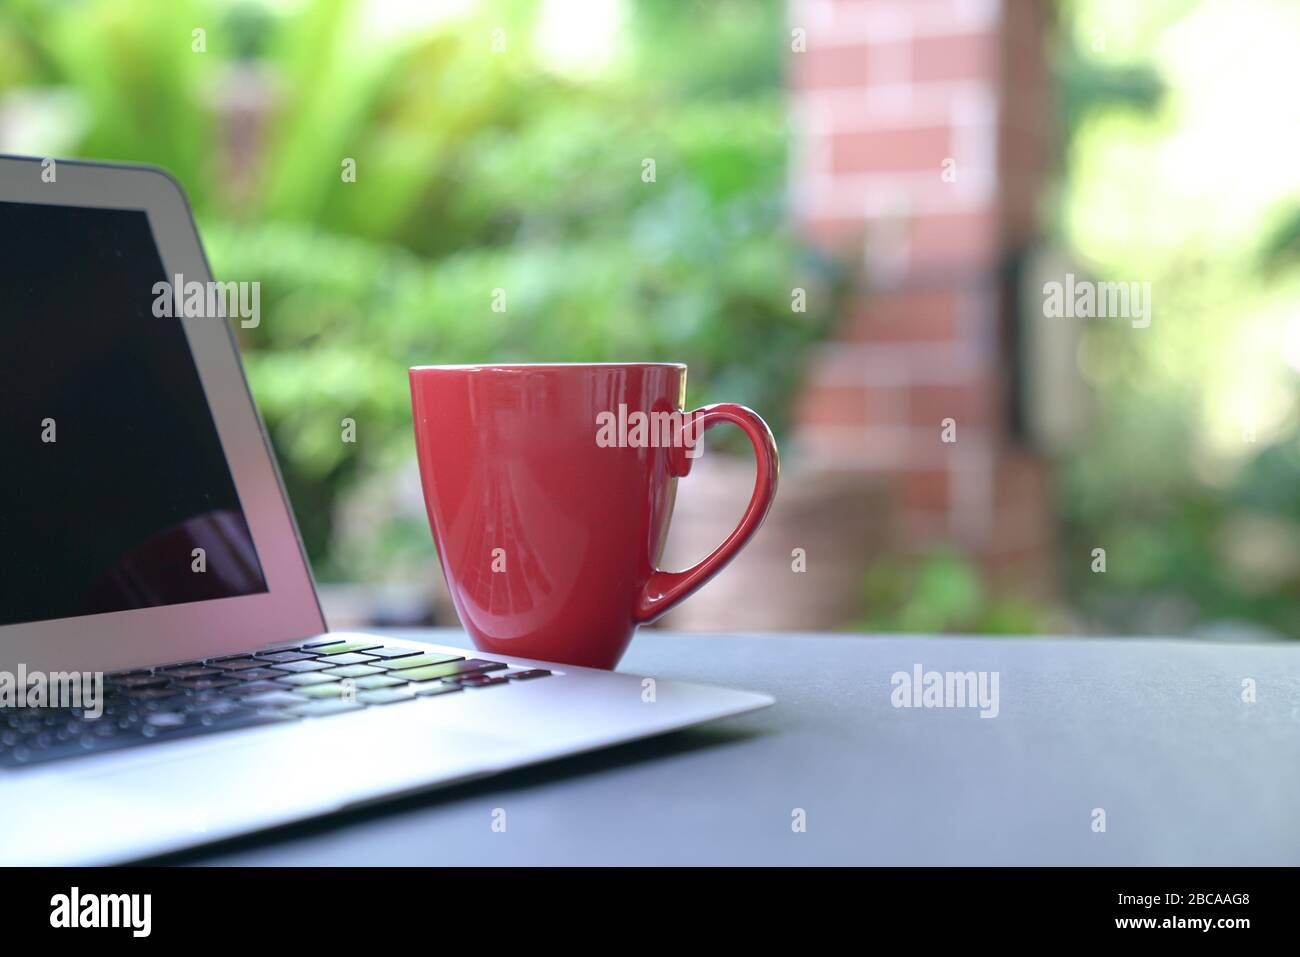 Computer laptop and coffee in red cup with garden background. Work from home. Copy space. Stock Photo